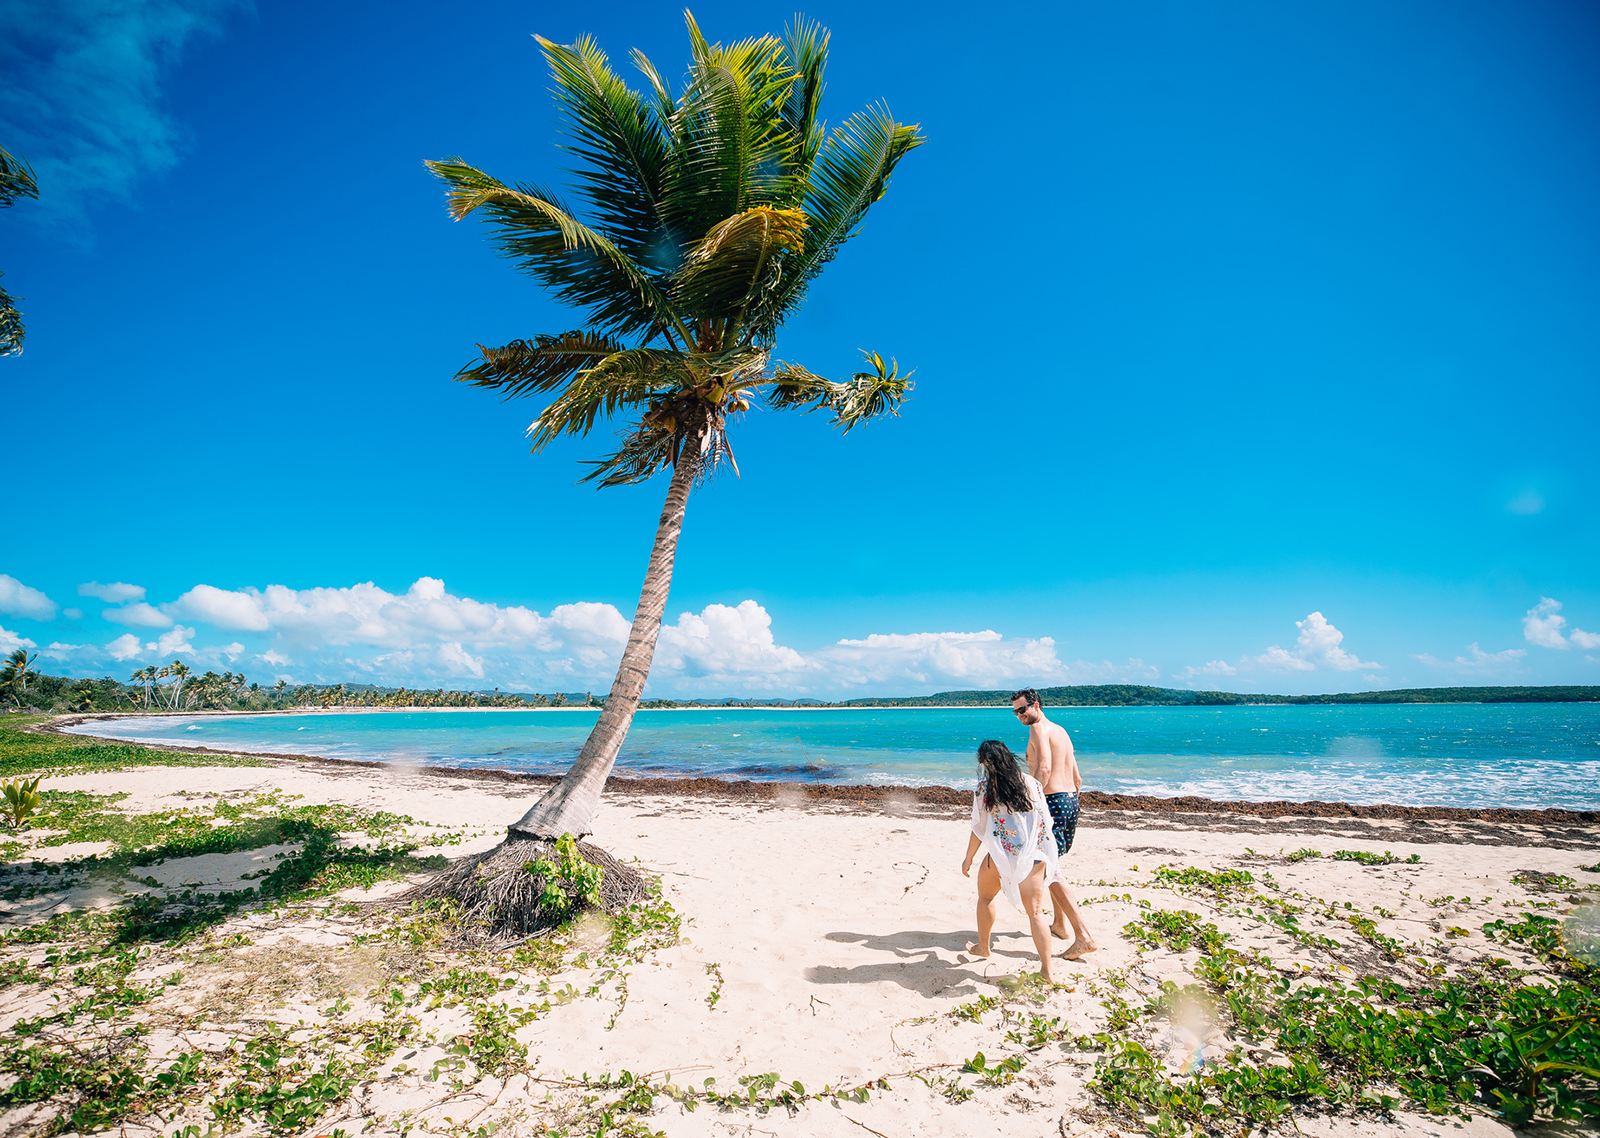 How To Get To Vieques And Culebra